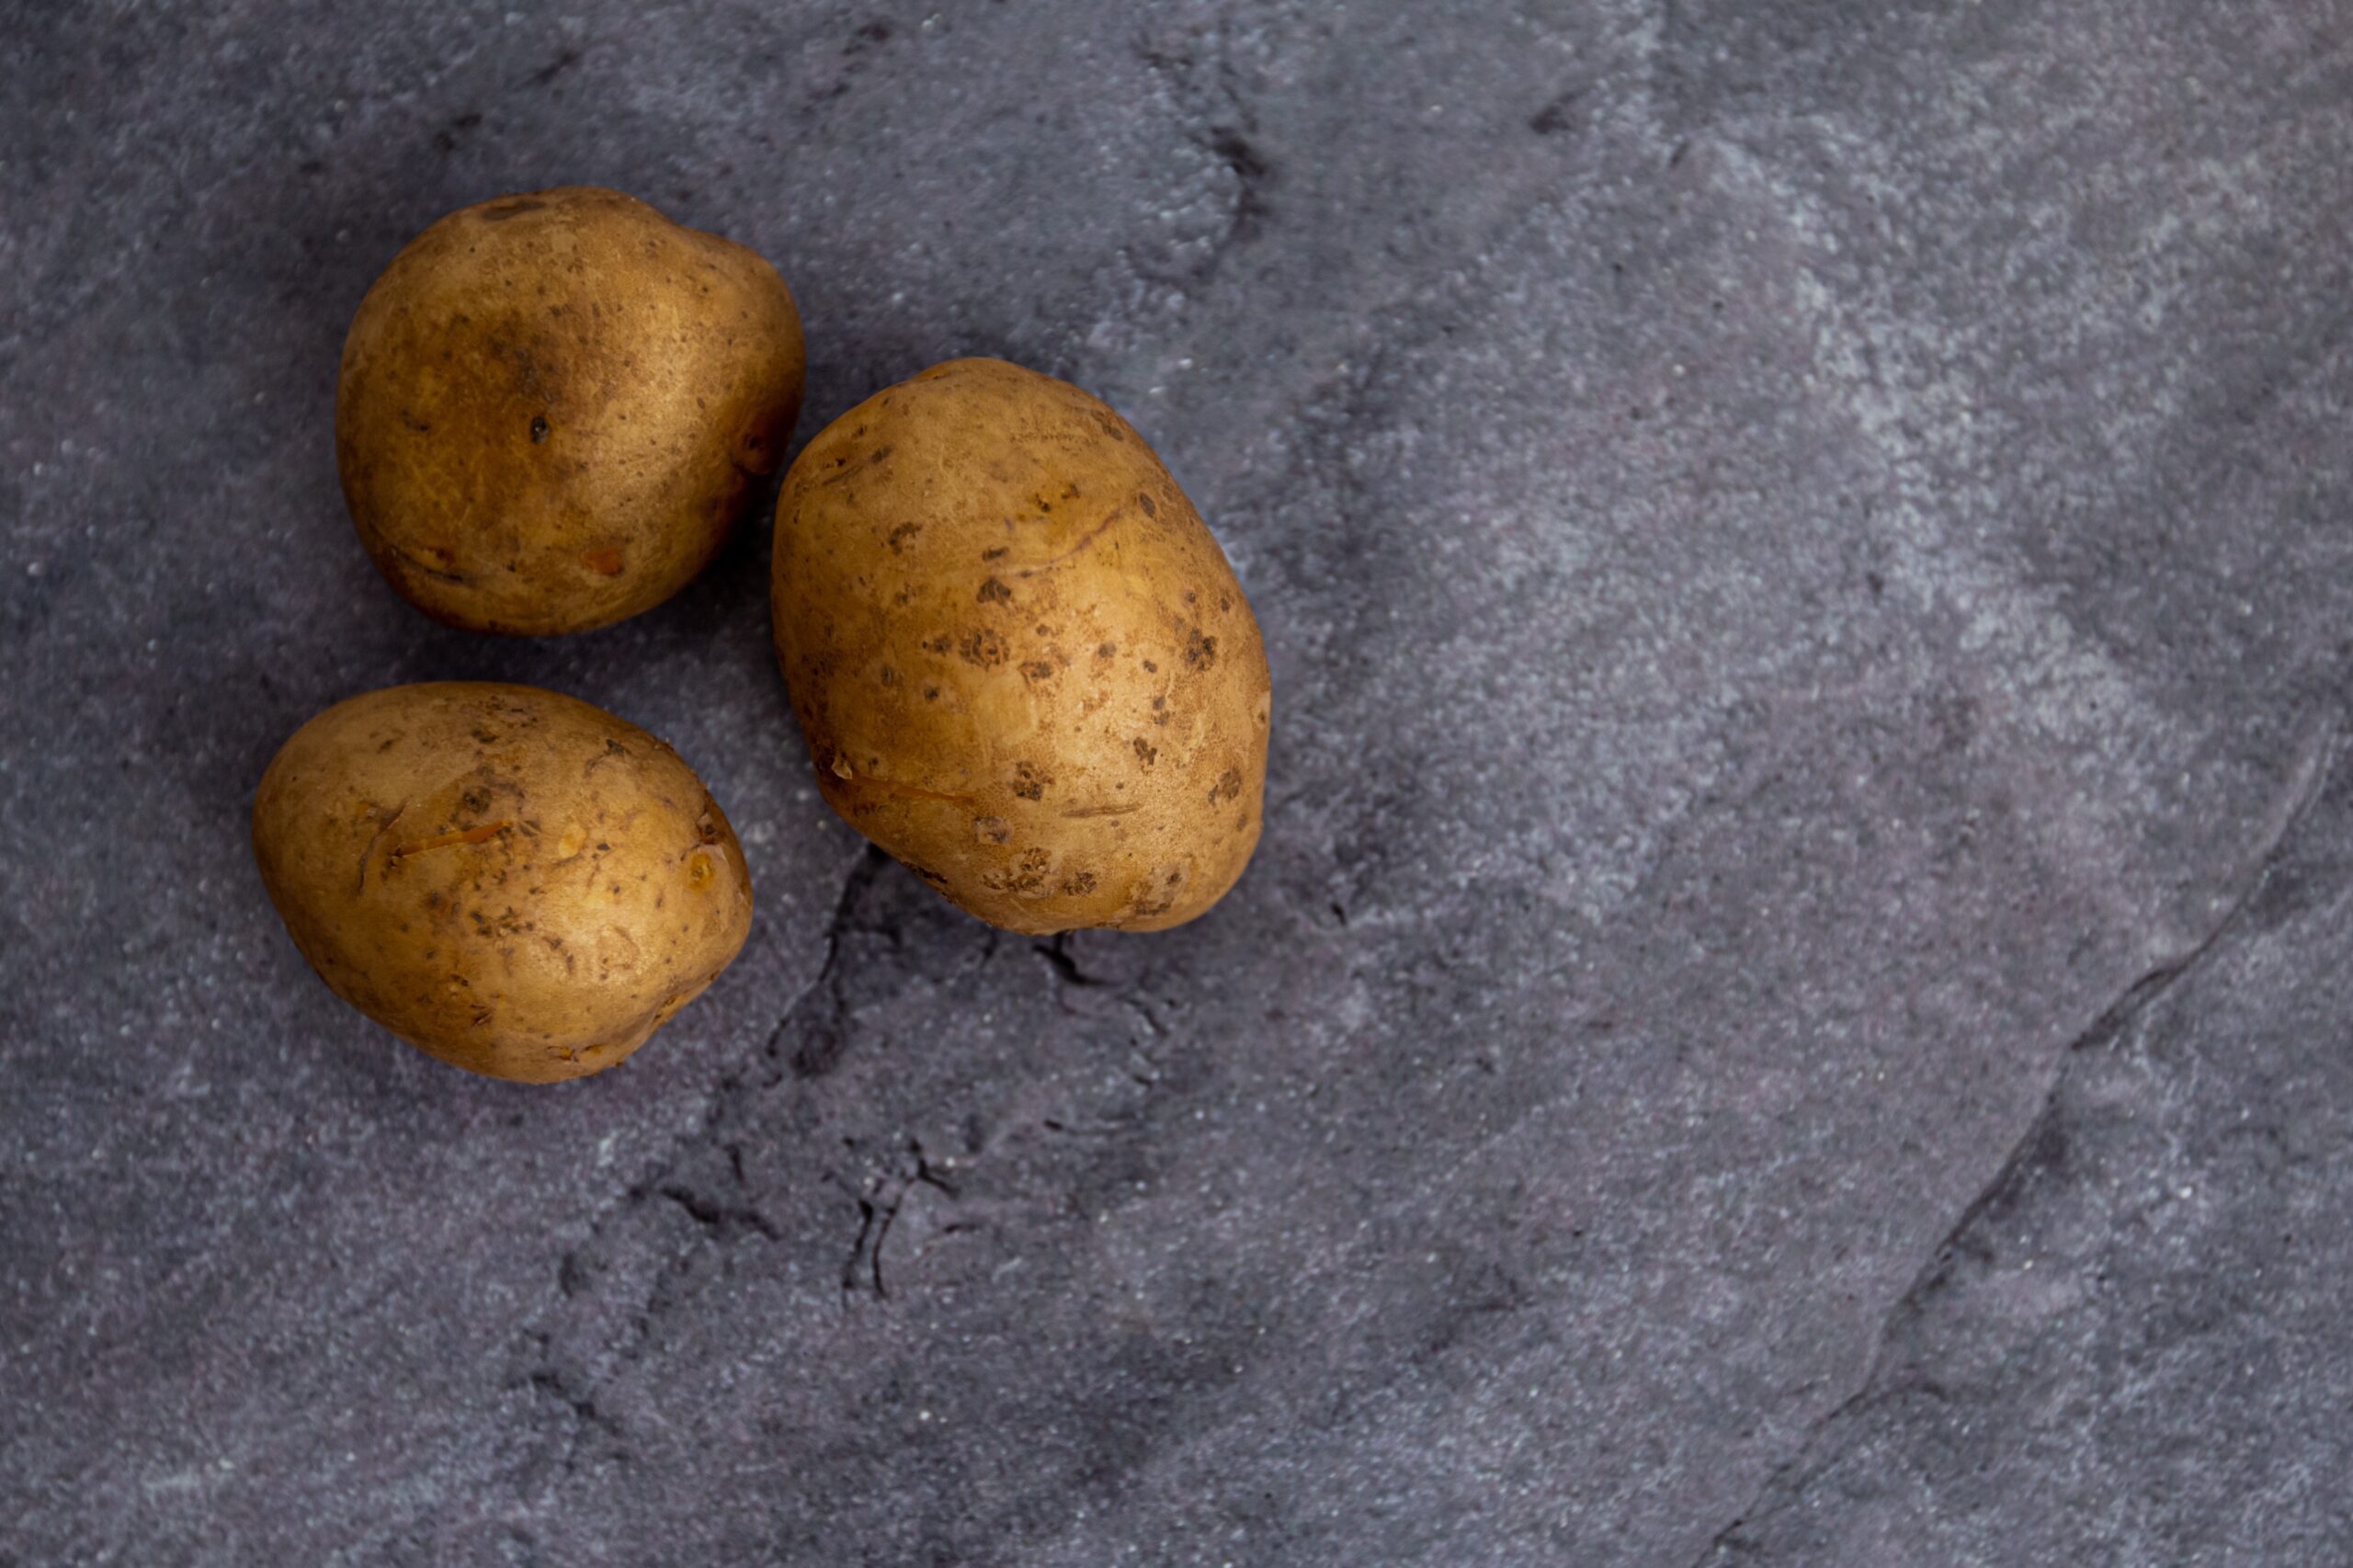 Photo by Victoria Emerson: https://www.pexels.com/photo/whole-uncooked-potatoes-arranged-on-gray-stone-surface-6037886/